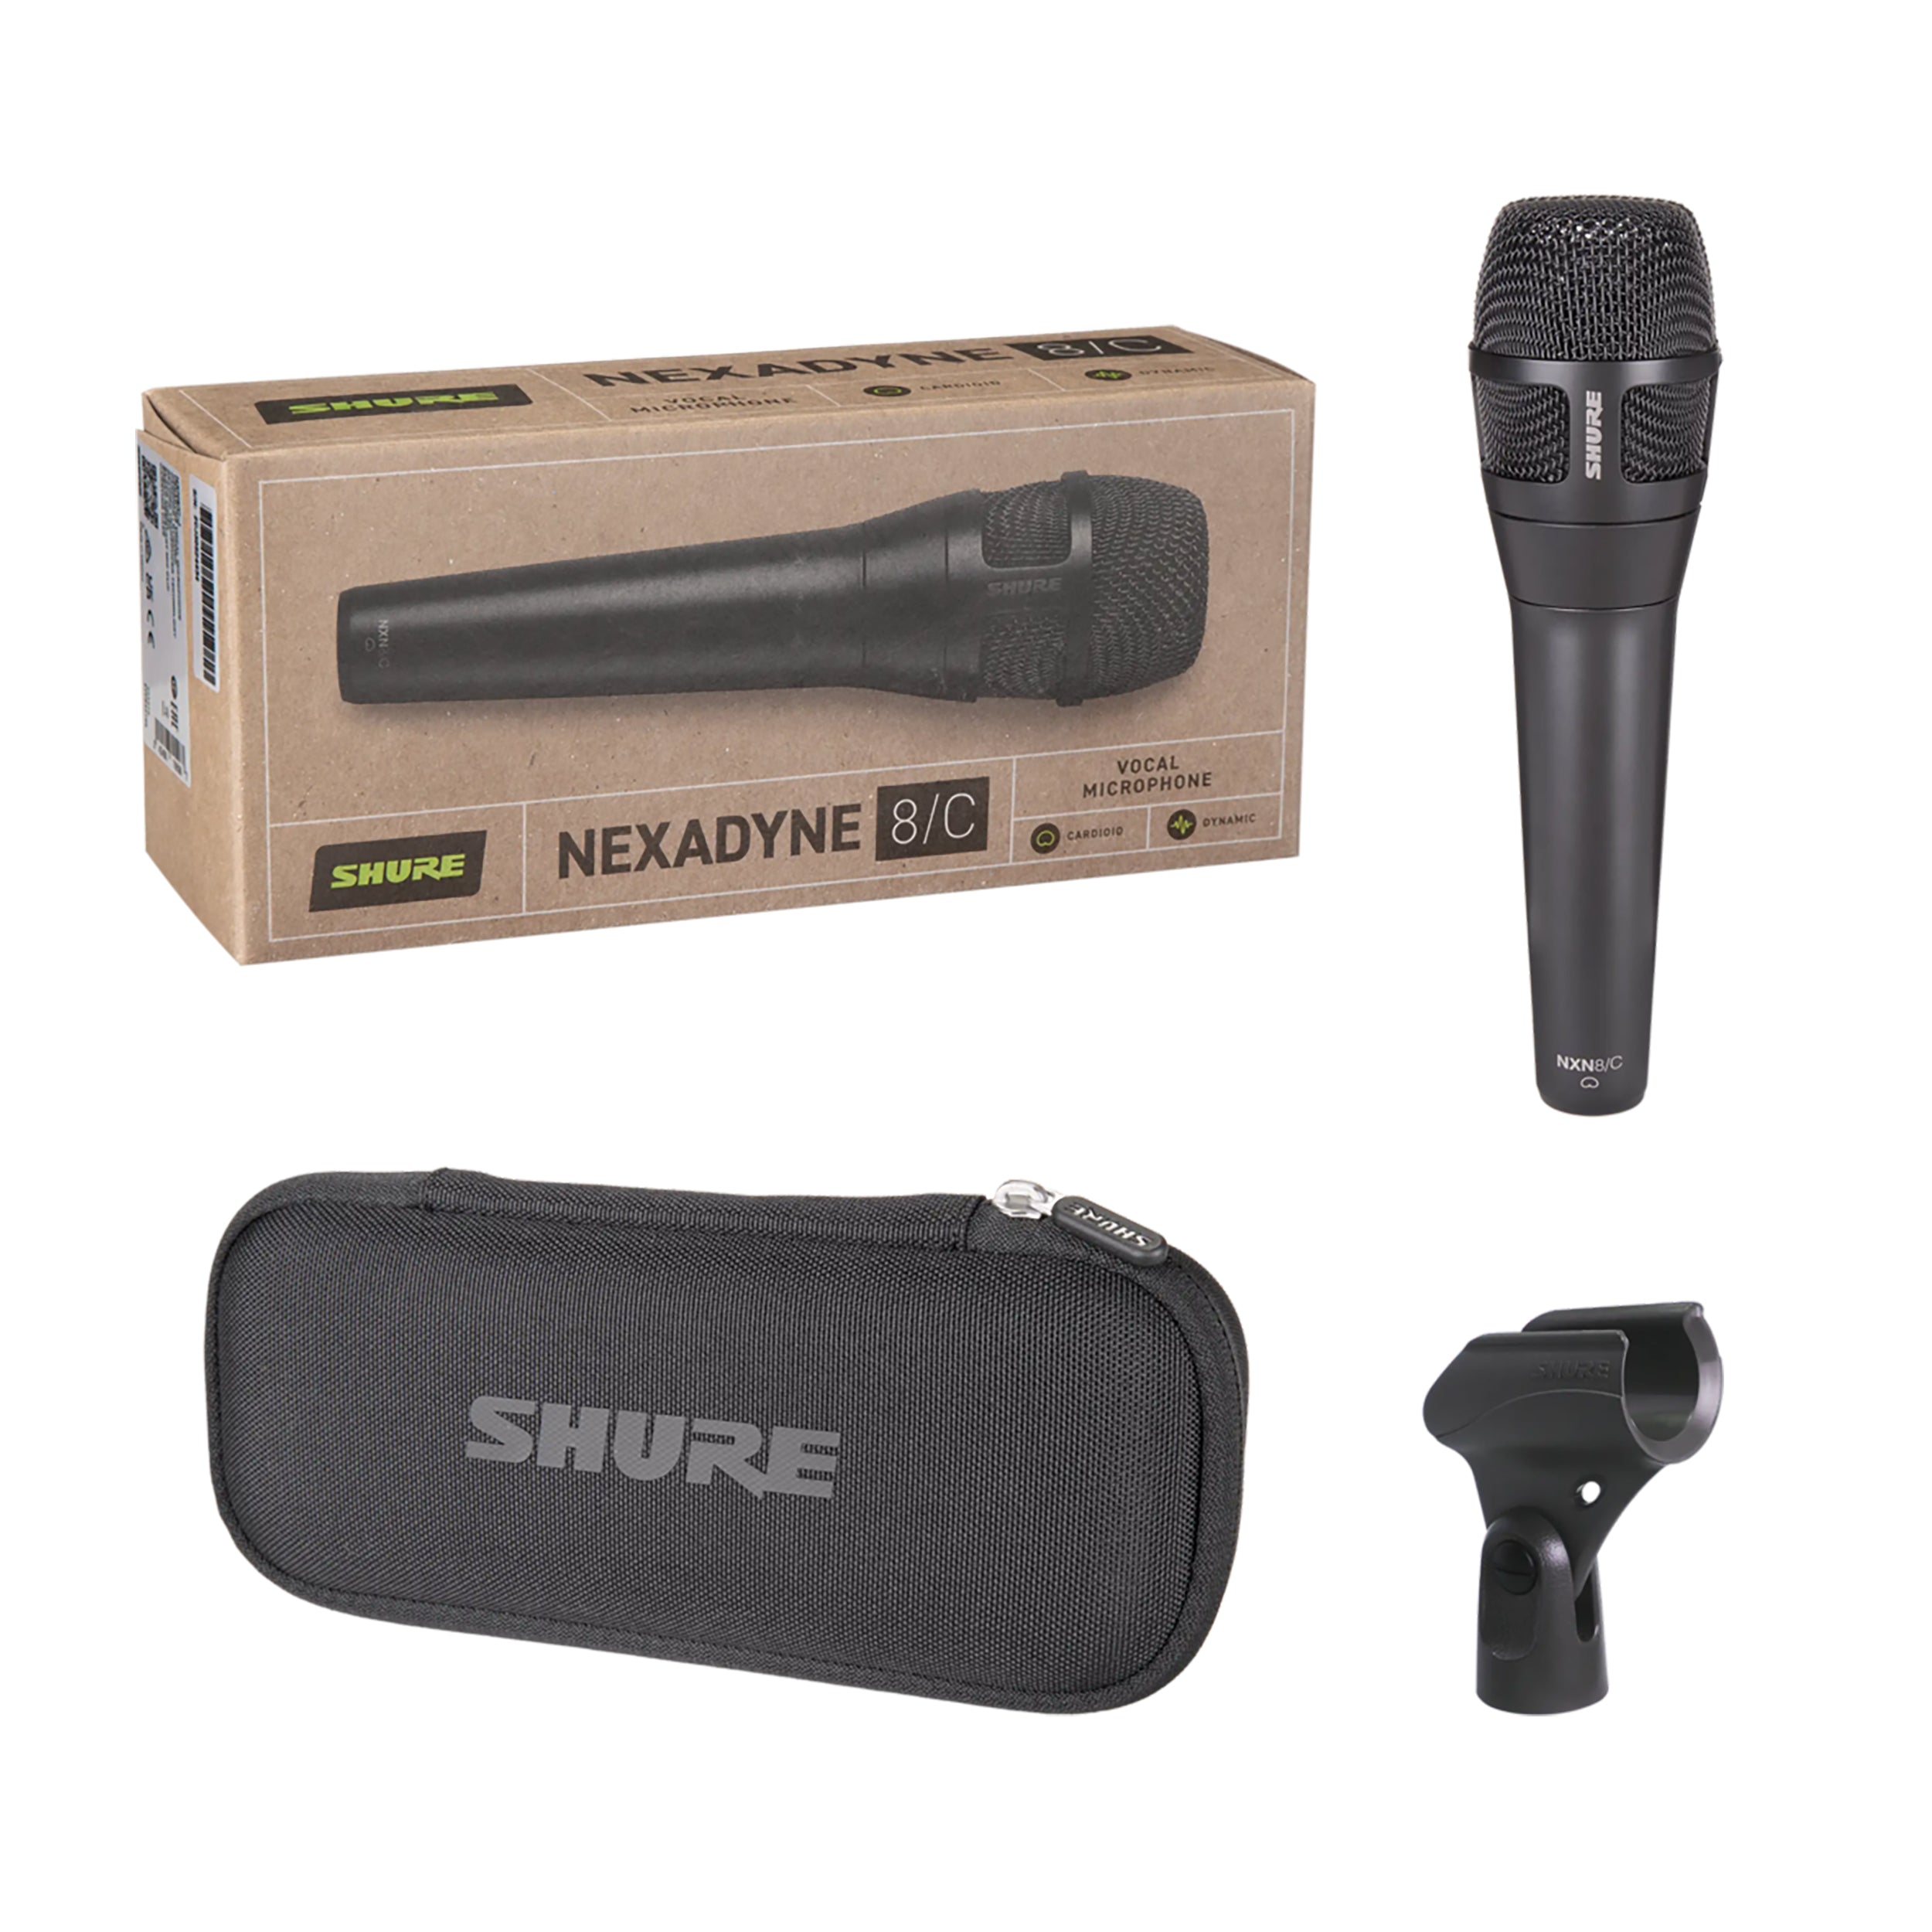 Shure NXN8/C Dynamic Cardiod Microphone and everything included